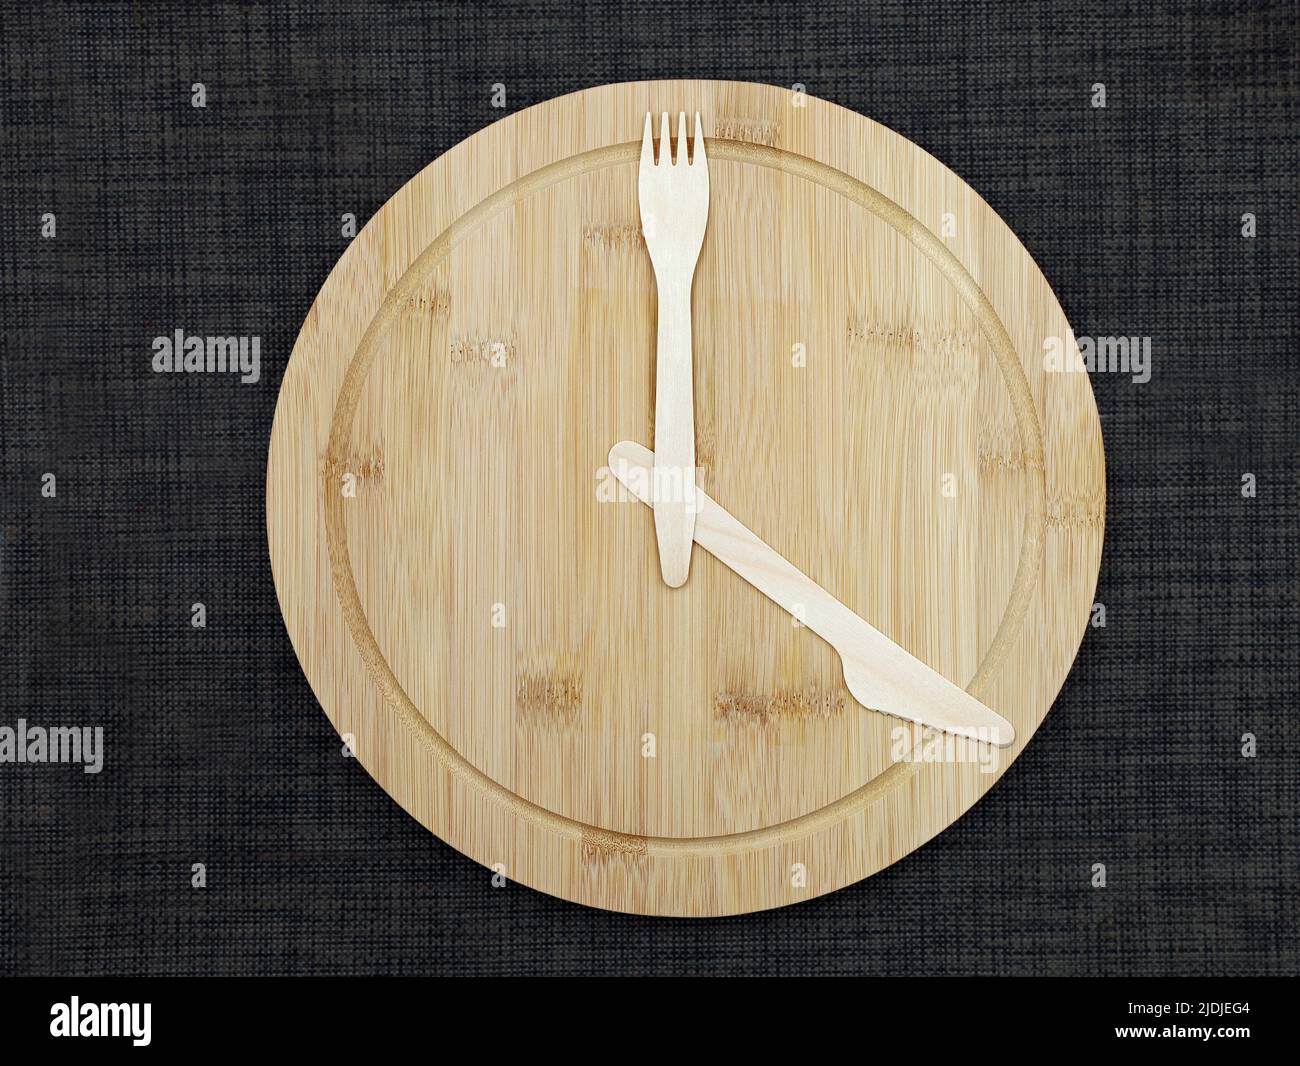 wooden fork and knife as clook hands on bamboo plate shows time, concept of intermittent fasting or time limited food intake to lose weight Stock Photo